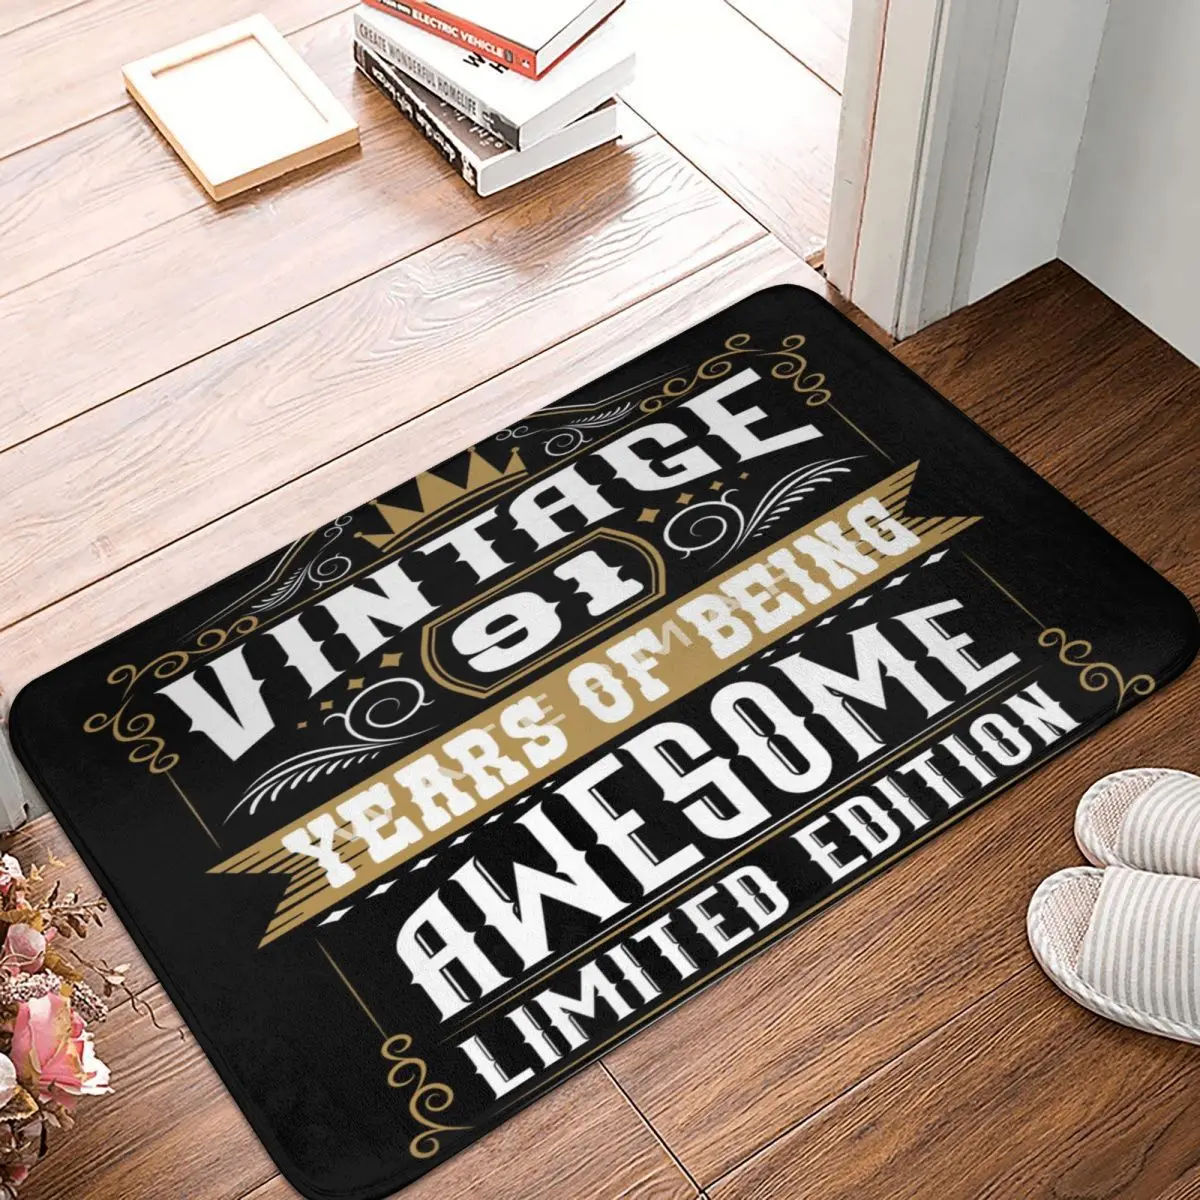 

91 Years Of Being Awesome Carpet, Polyester Floor Mats Fashionable Practical Everyday Festivle Gifts Mats Customizable